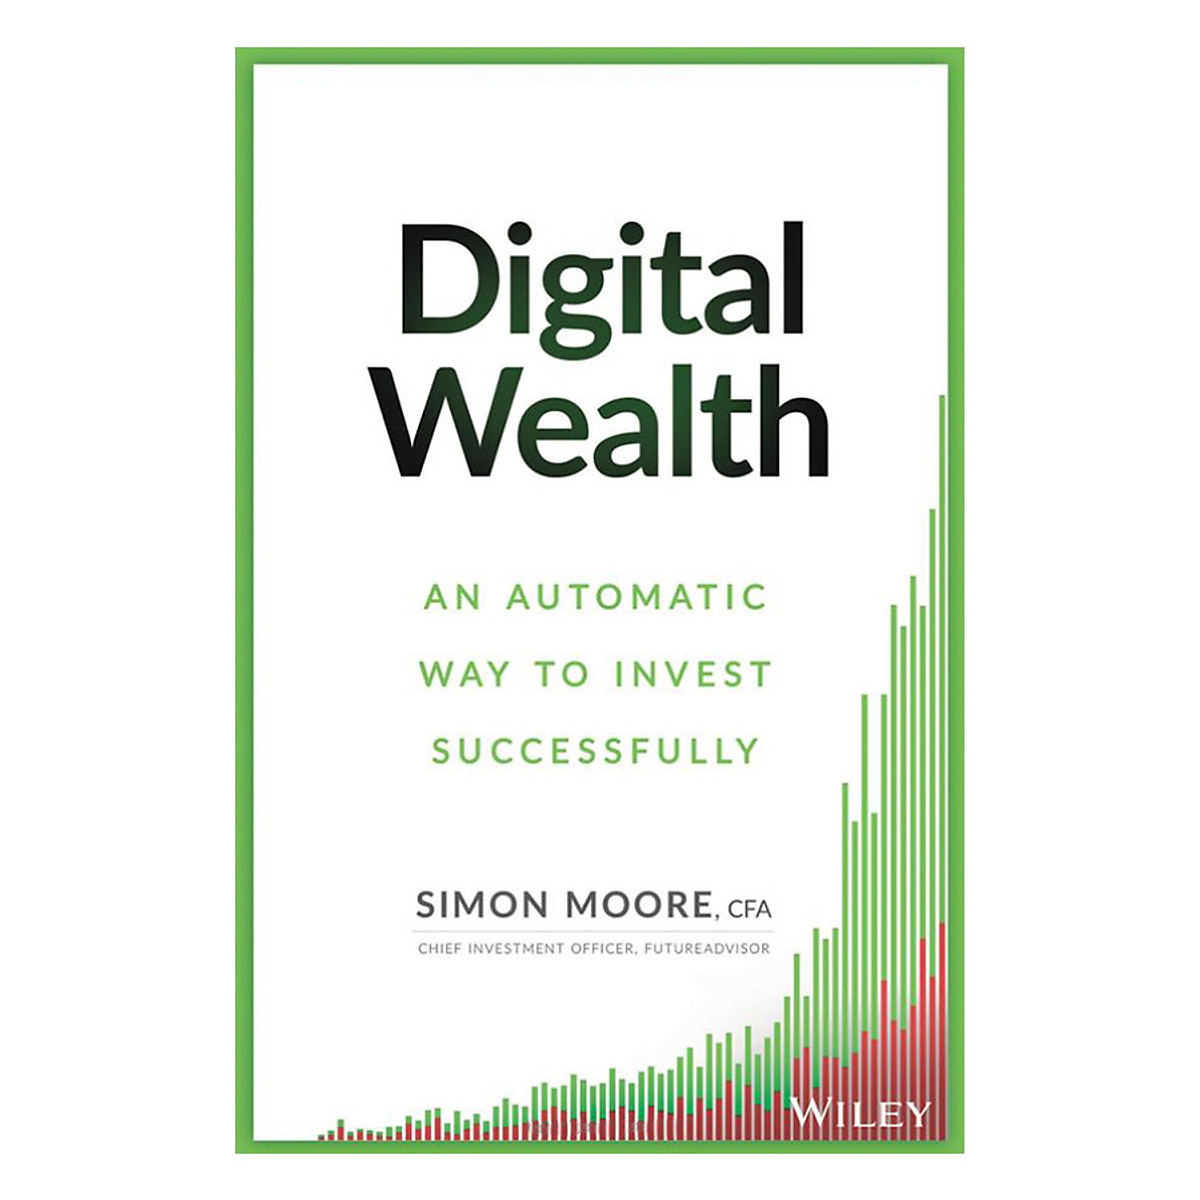 Digital Wealth: An Automatic Way To Invest Successfully